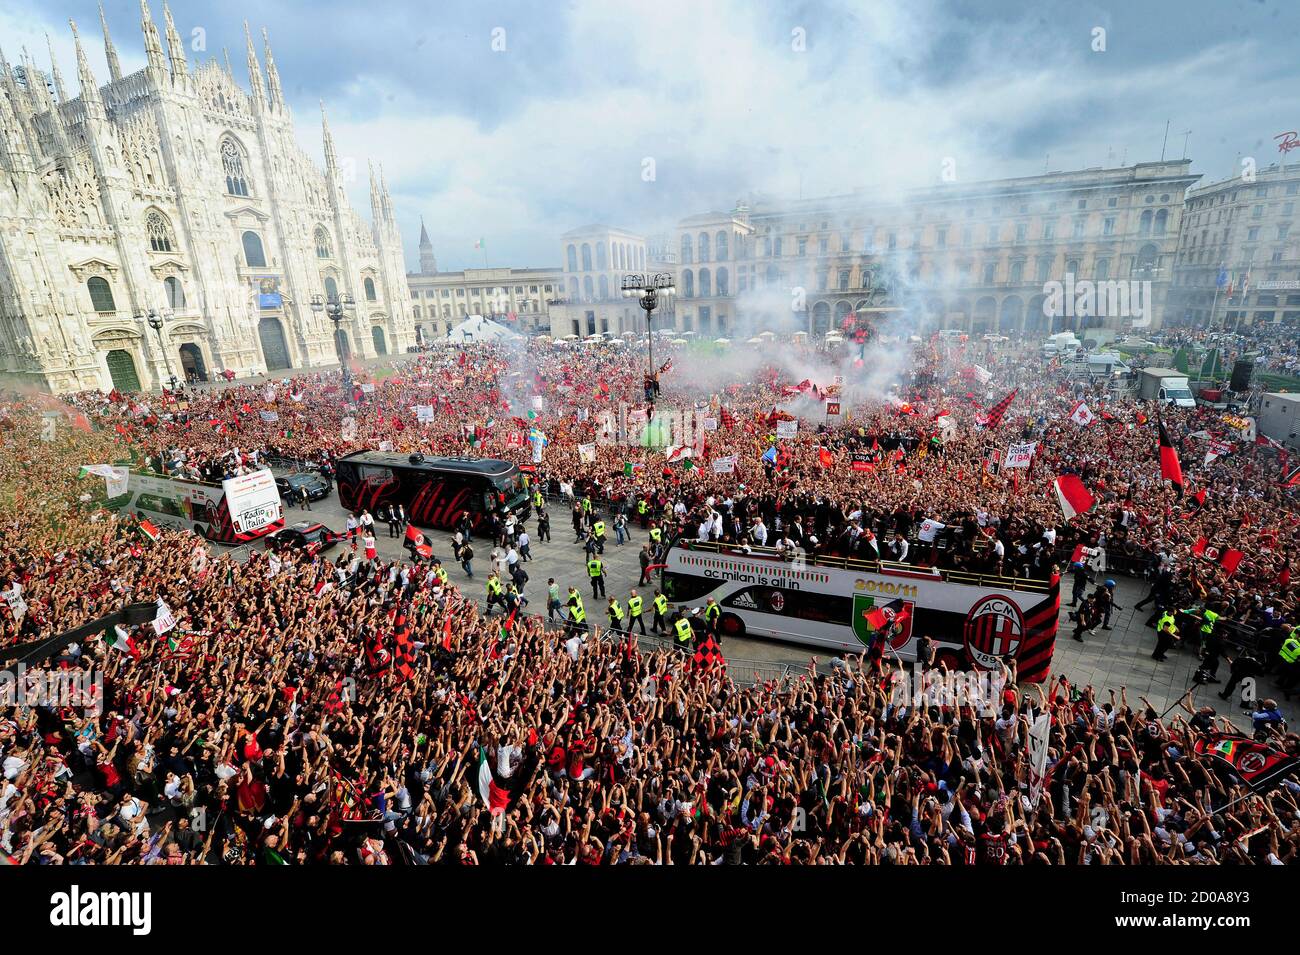 AC players and staff celebrate on a bus after the team won their 18th Italian Serie A title, in Duomo square, downtown Milan, May 14, REUTERS/Paolo Bona (ITALY - Tags: